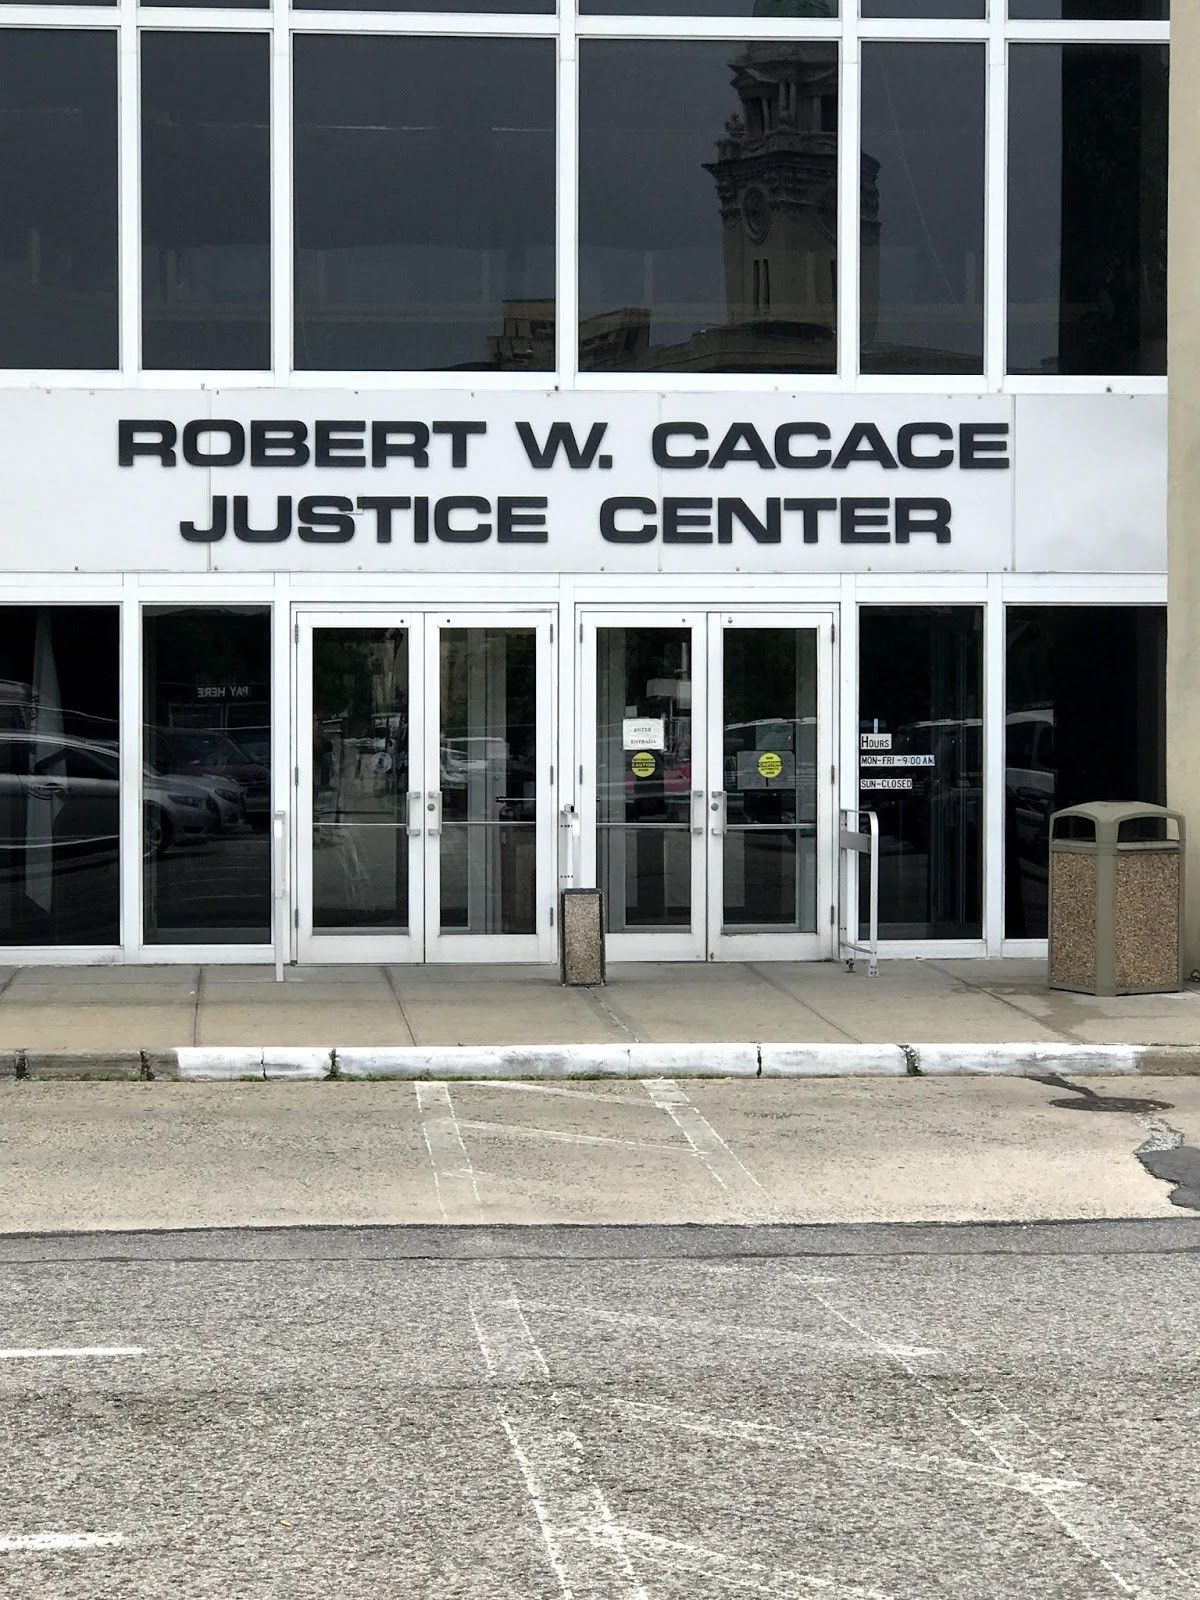 Robert W. Cacace Justice Center